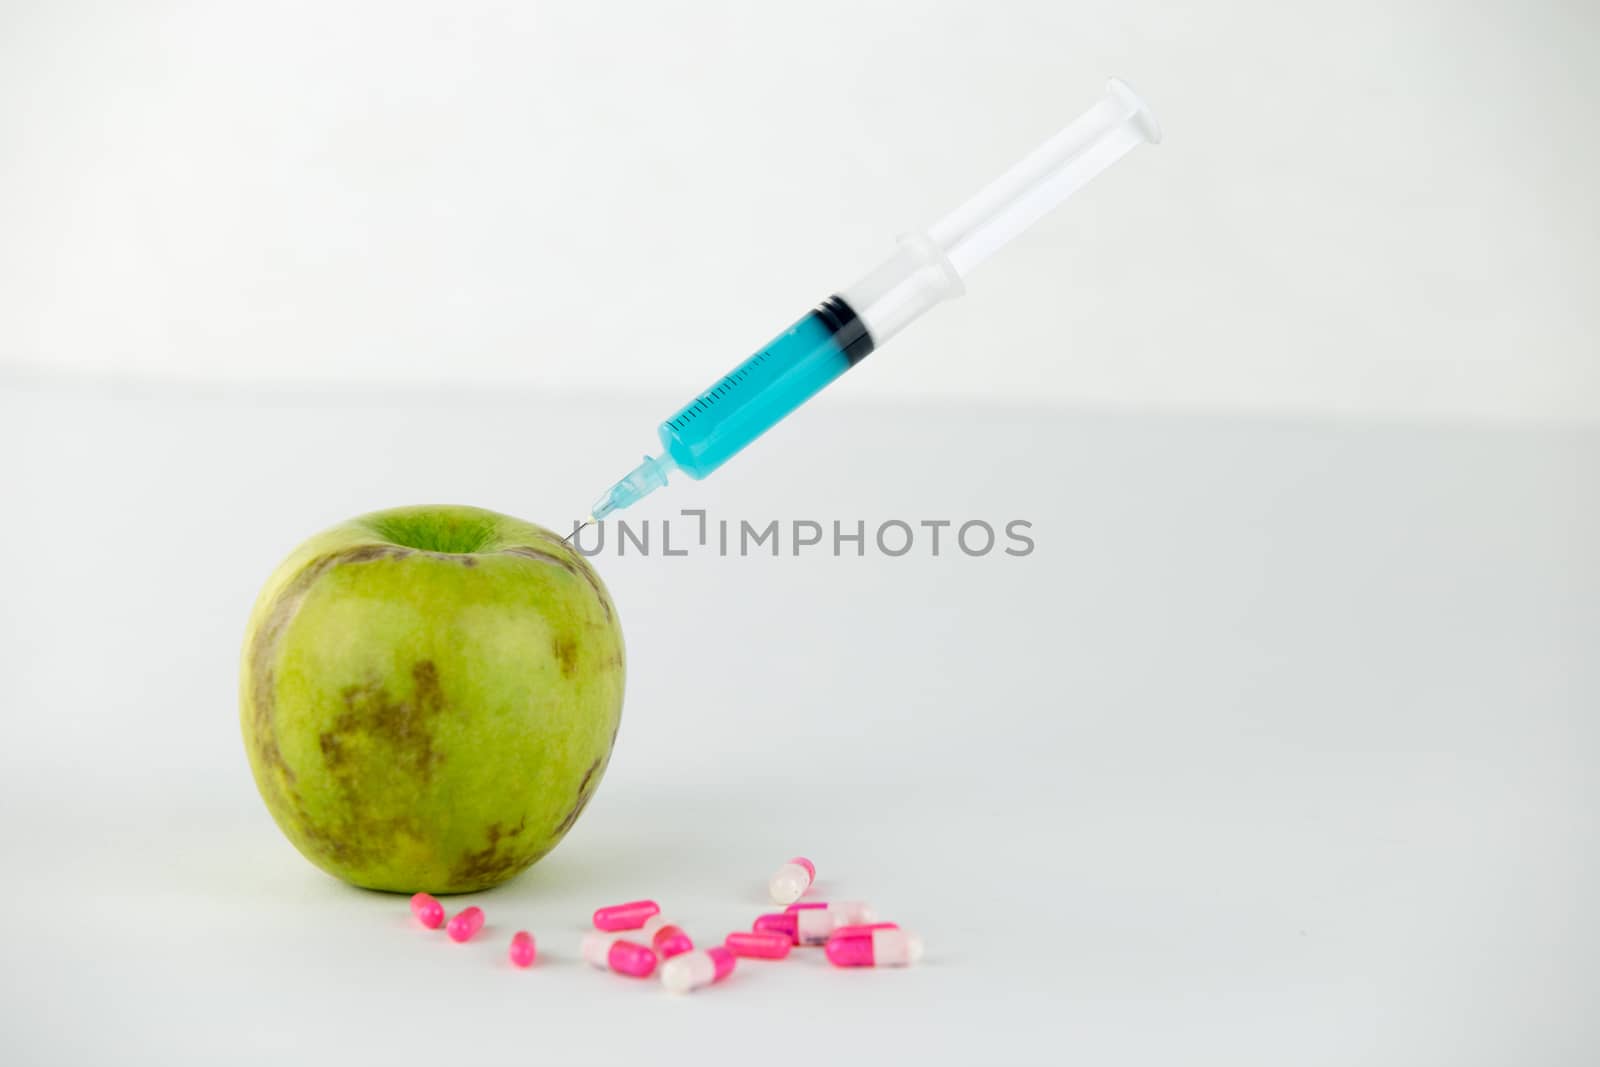 Concept: human GMO manipulation of nature and relative poisoned fruits. Close-up of an apple contaminated with a syringe threaded in and medicines on a white background